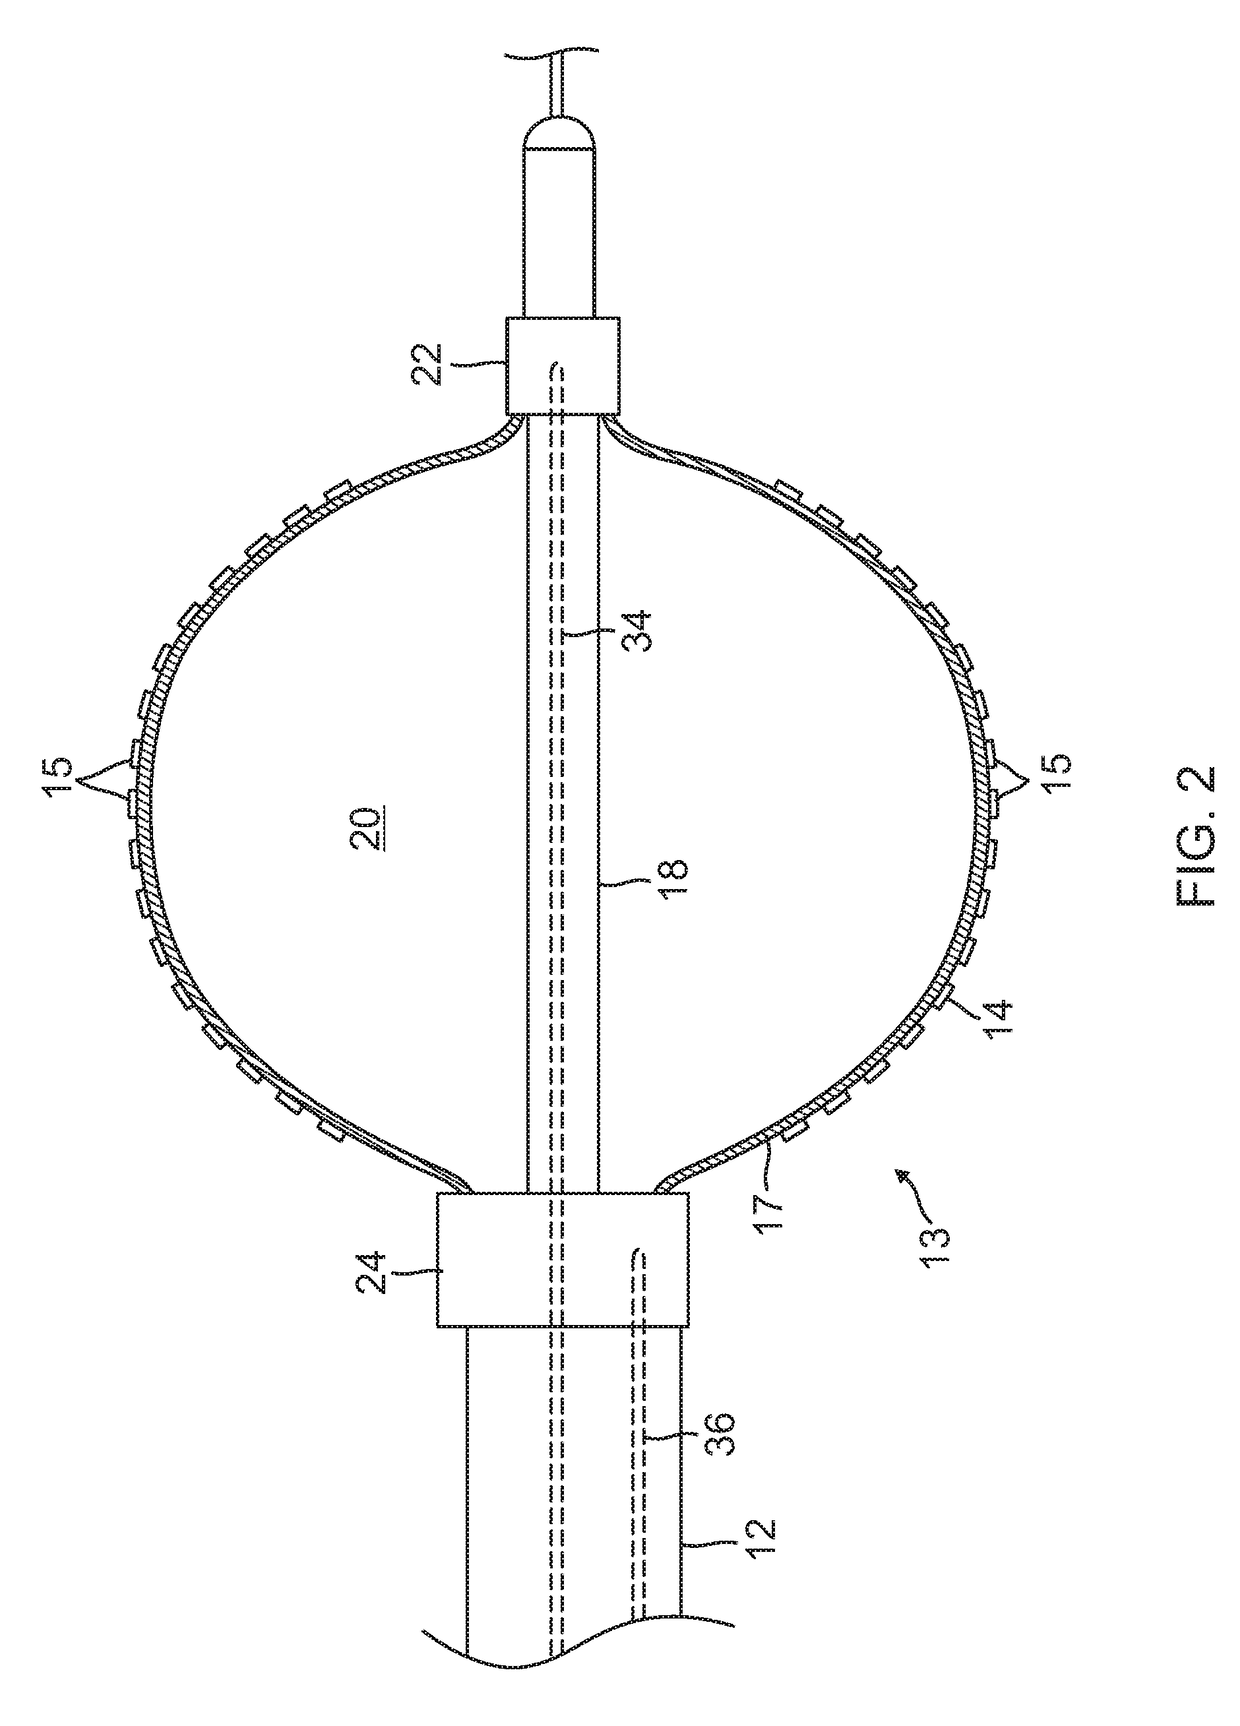 Balloon catheter and related impedance-based methods for detecting occlusion